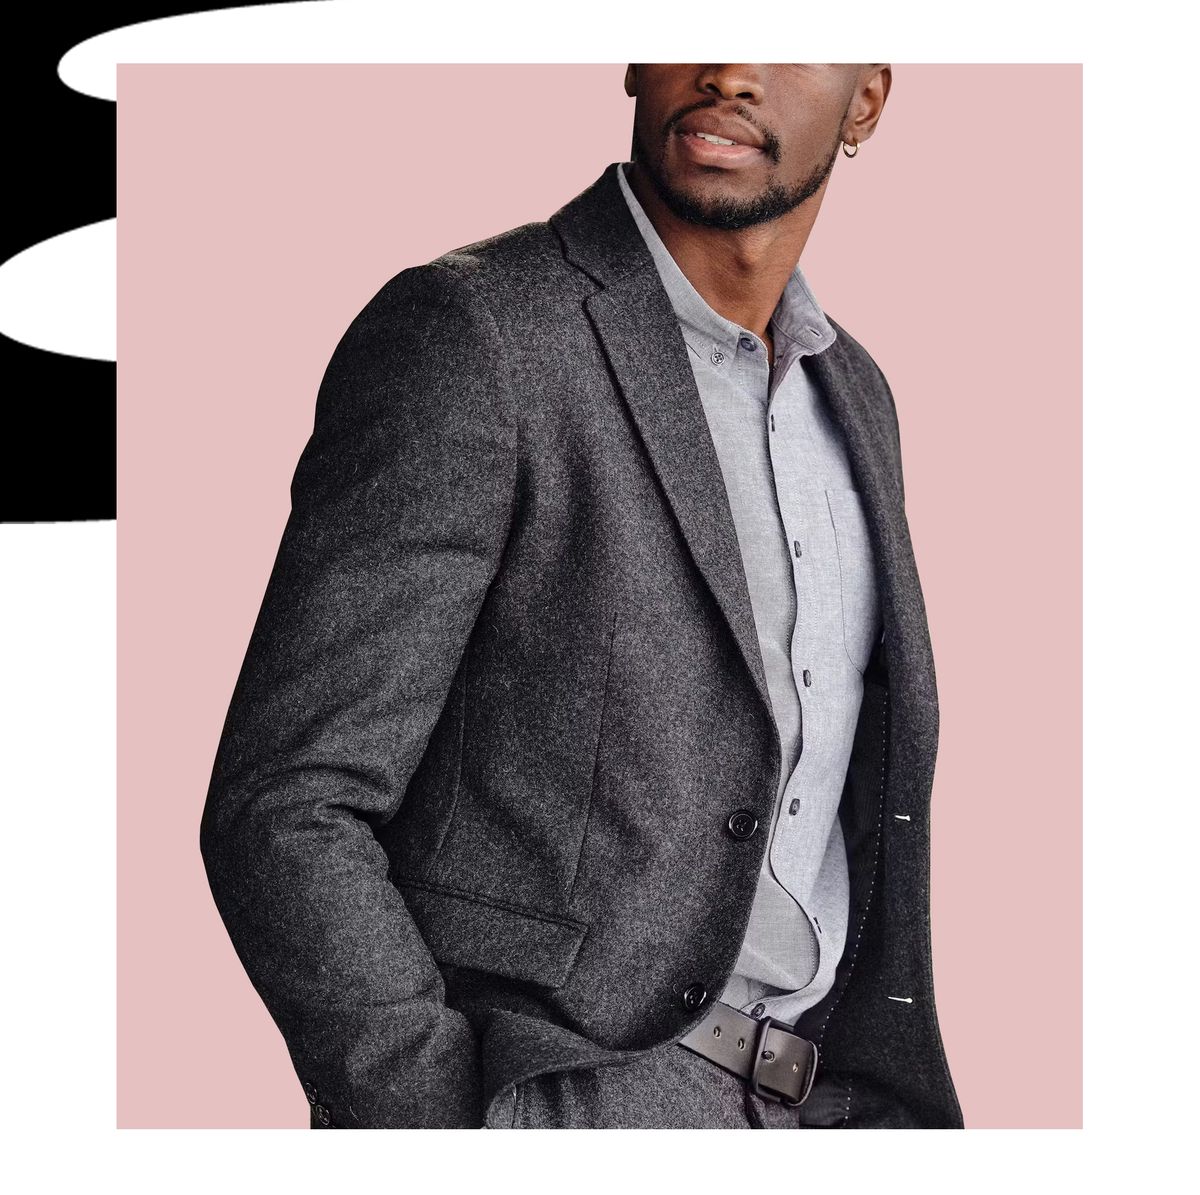 How to Wear a Blazer and Jeans Outfit for Men - Nimble Made